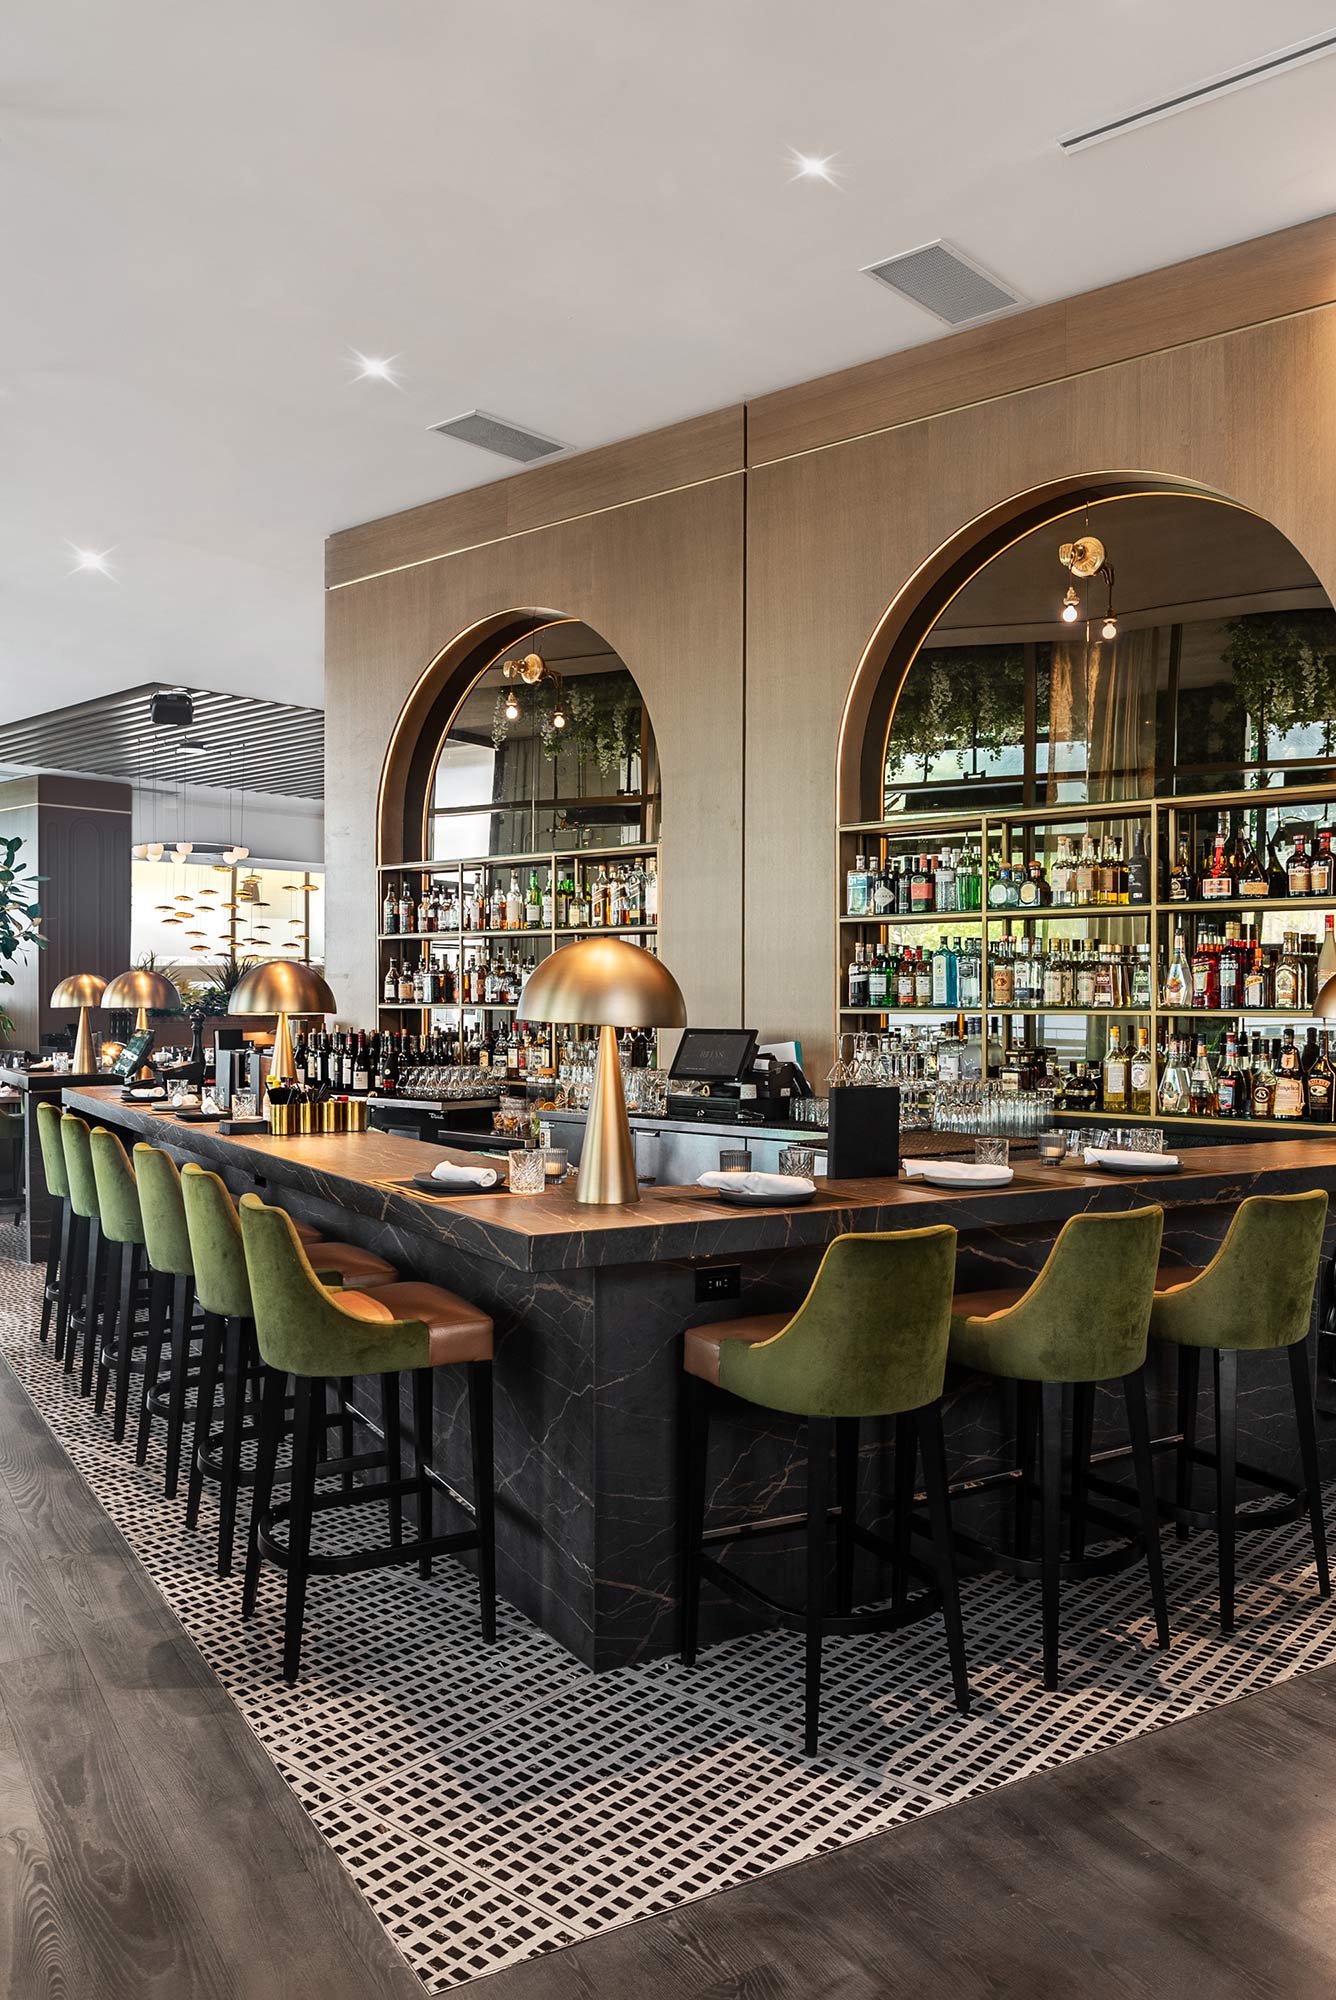 Image of Rileys HMerenda bar2 in This renowned Parisian restaurant featuring Cosentino surfaces on its tables, bar tops and walls is a lesson in modern and elegant décor - Cosentino